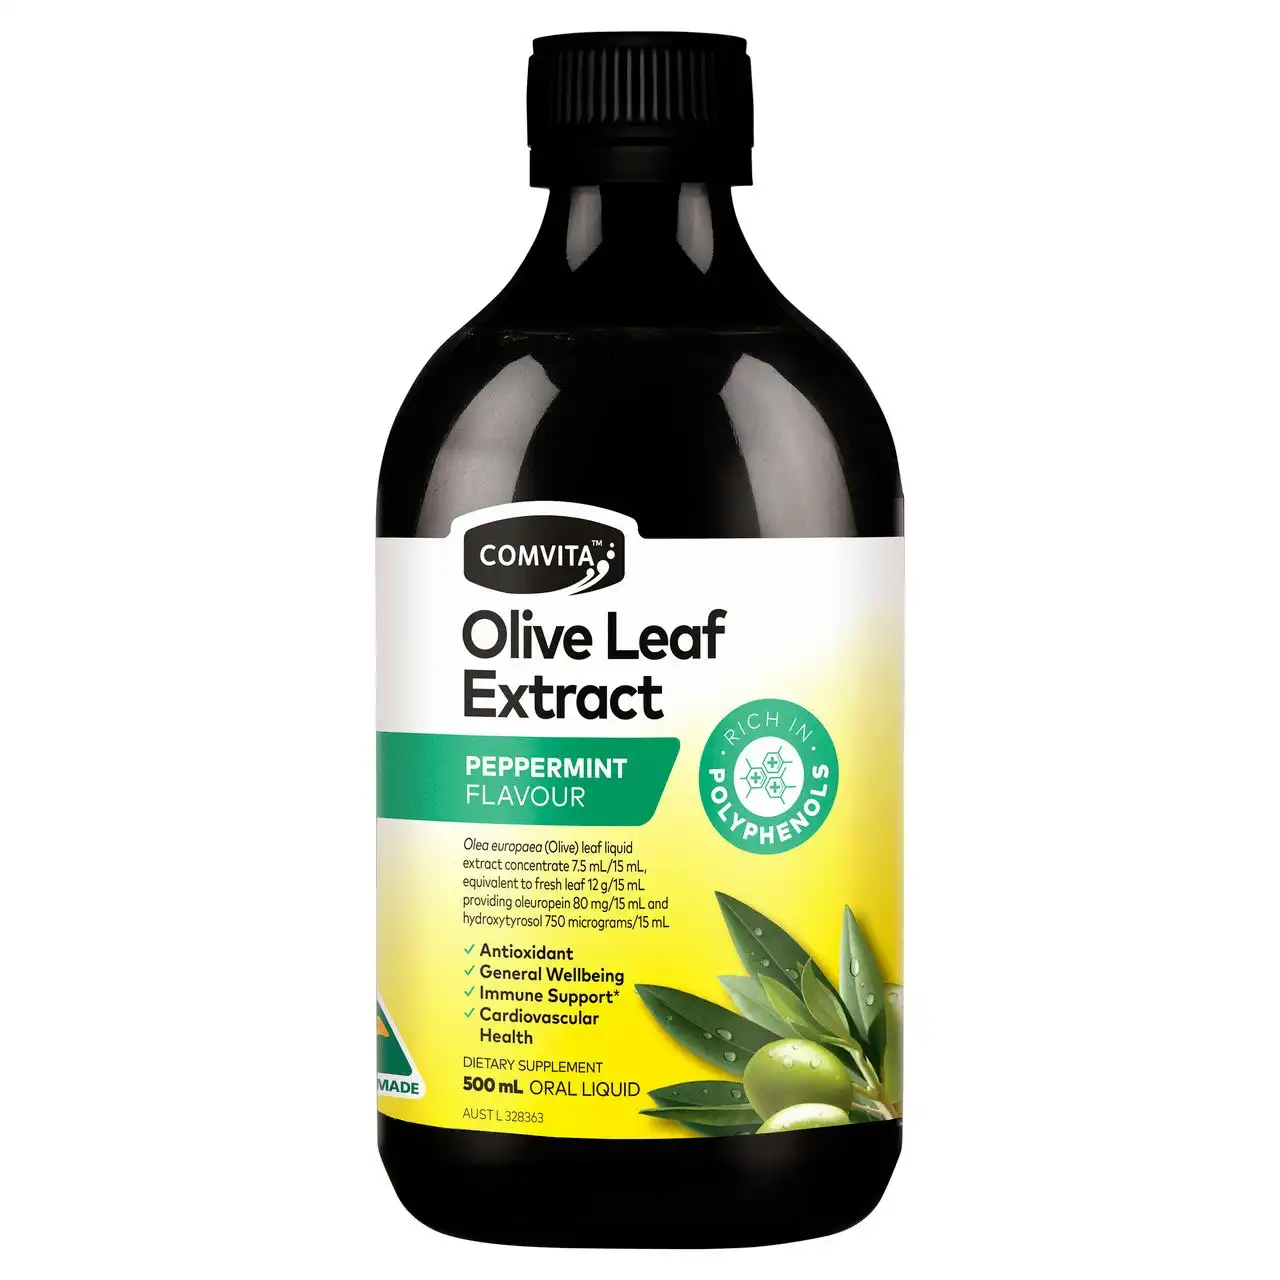 Comvita Olive Leaf Extract Peppermint Flavour 500mL